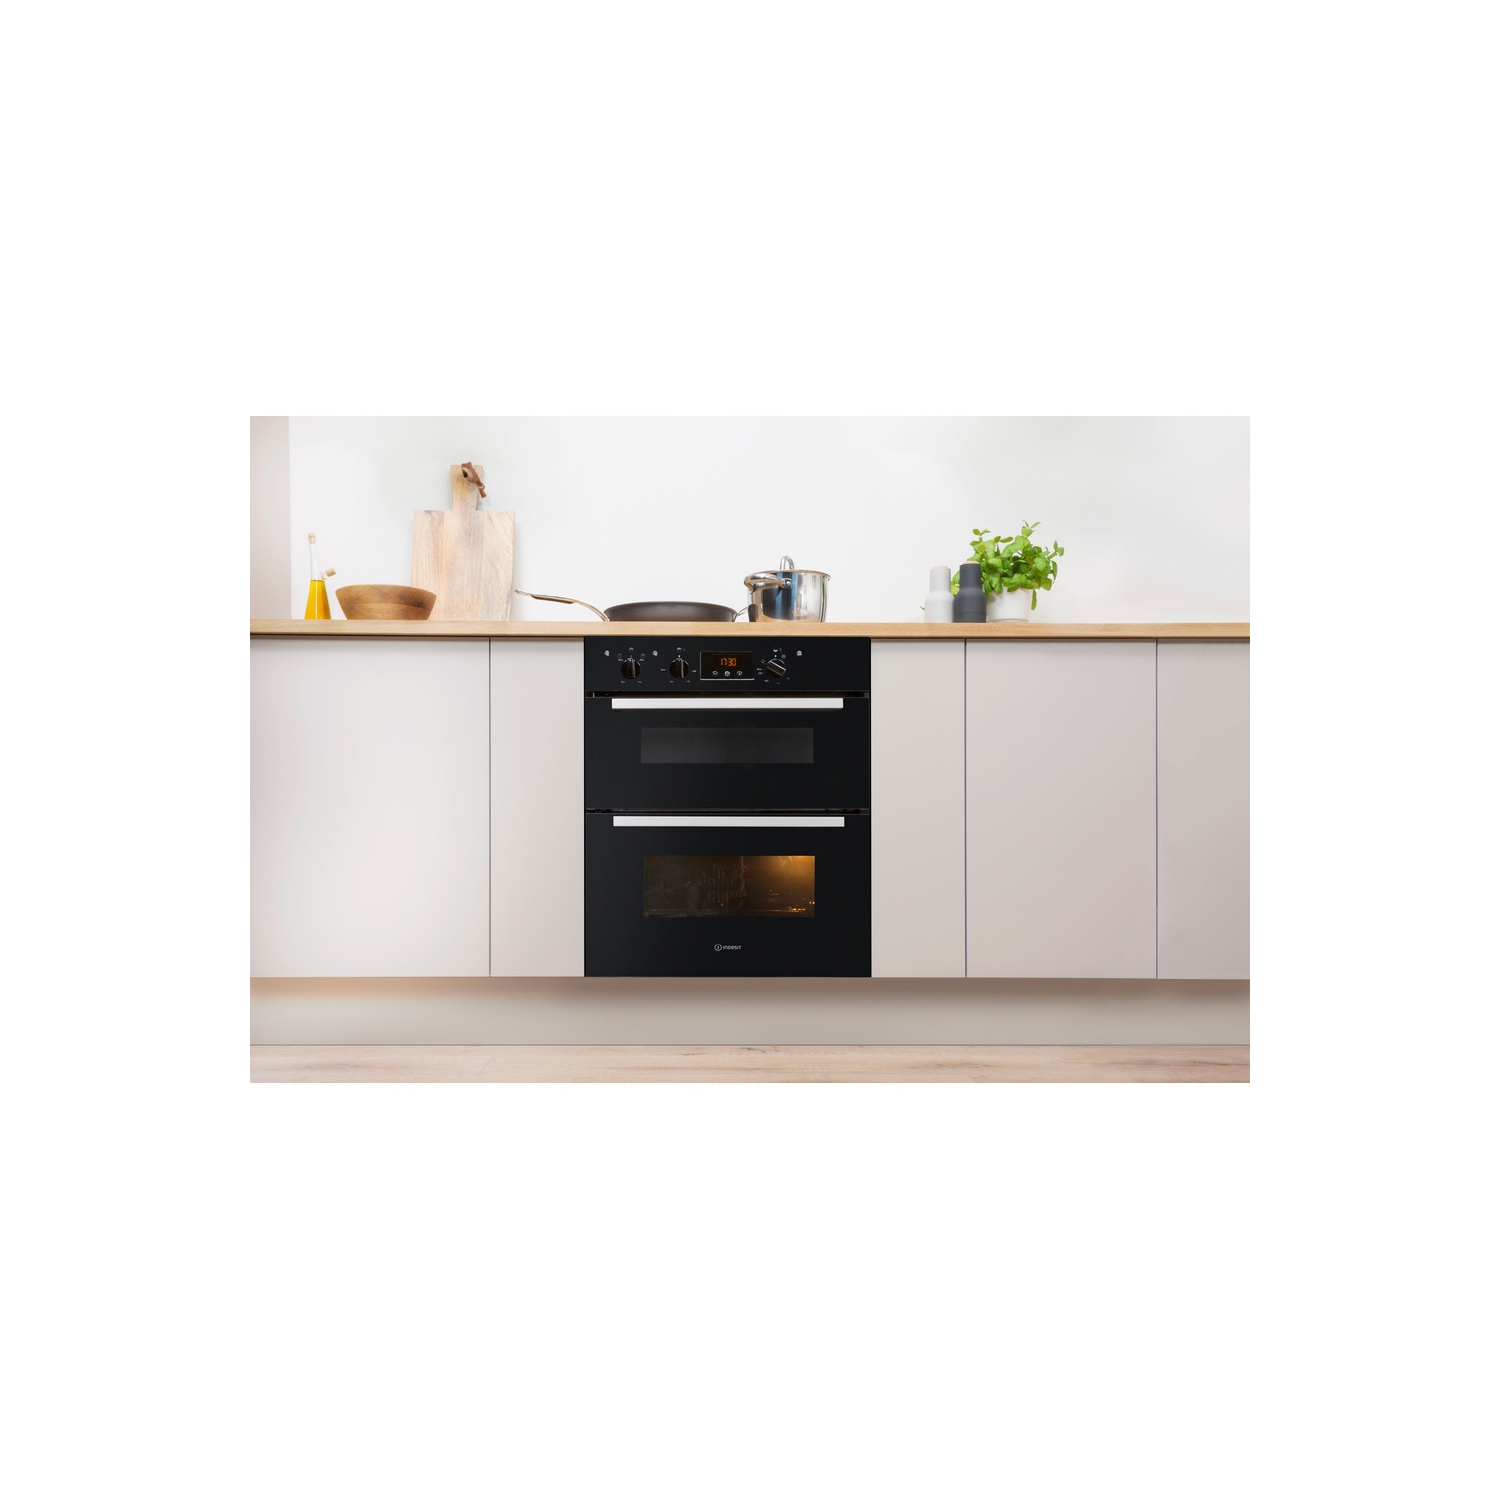 Indesit Built In Electric Double Oven - Black - B Rated - 9